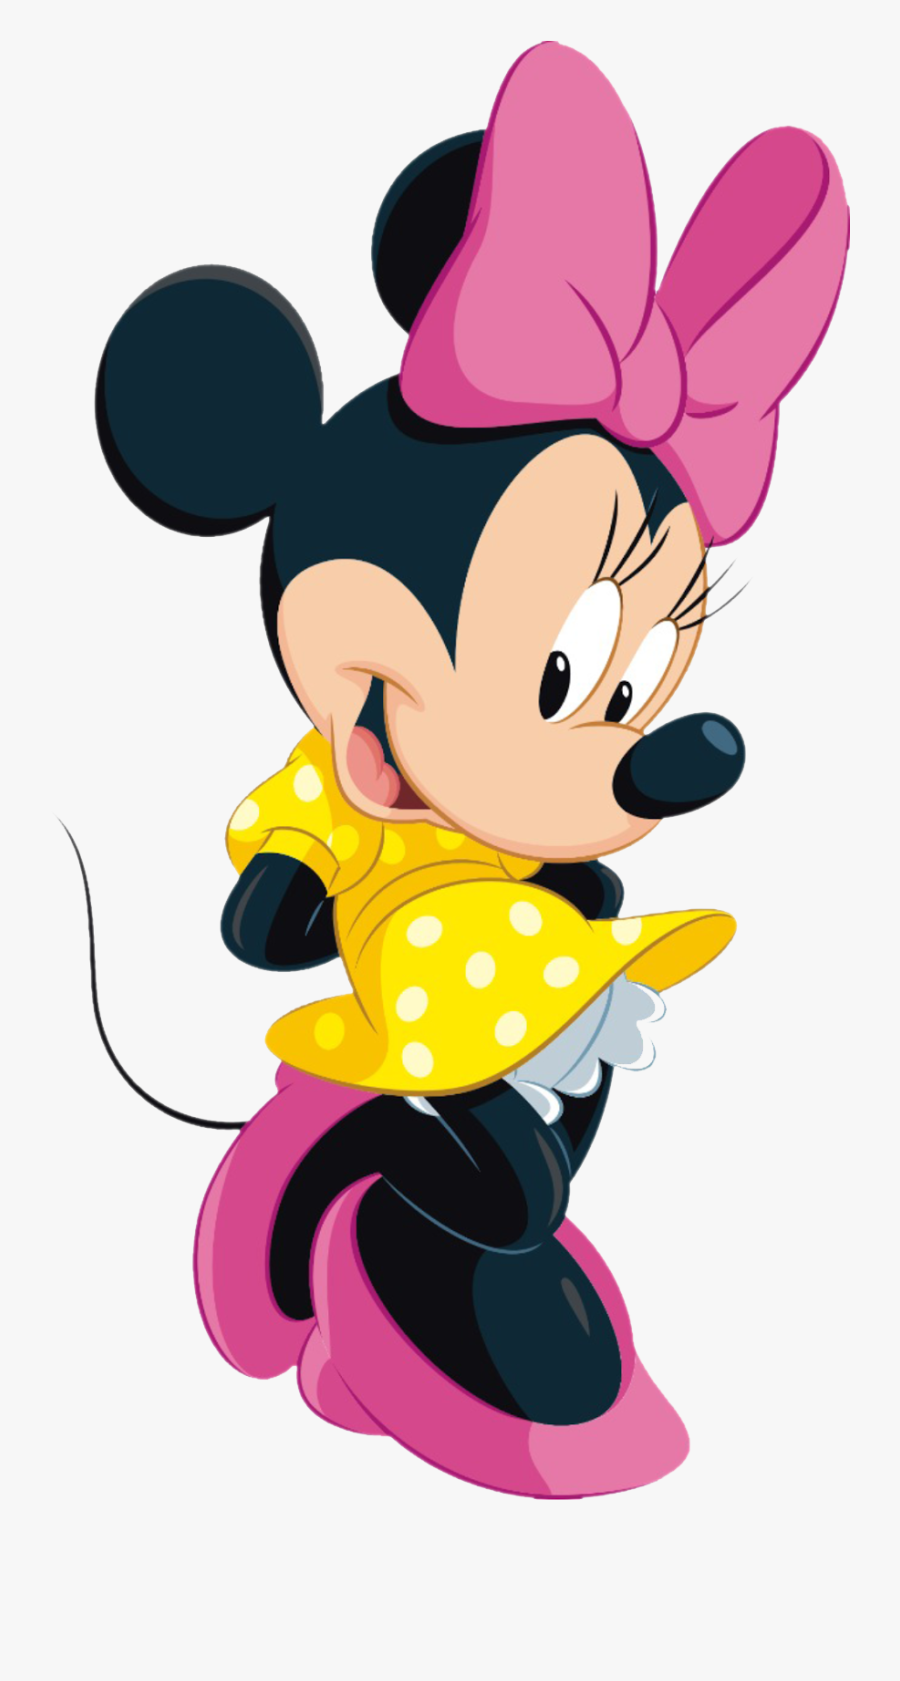 Minnie Mouse Png Pic - Minnie Mouse Yellow Dress, Transparent Clipart